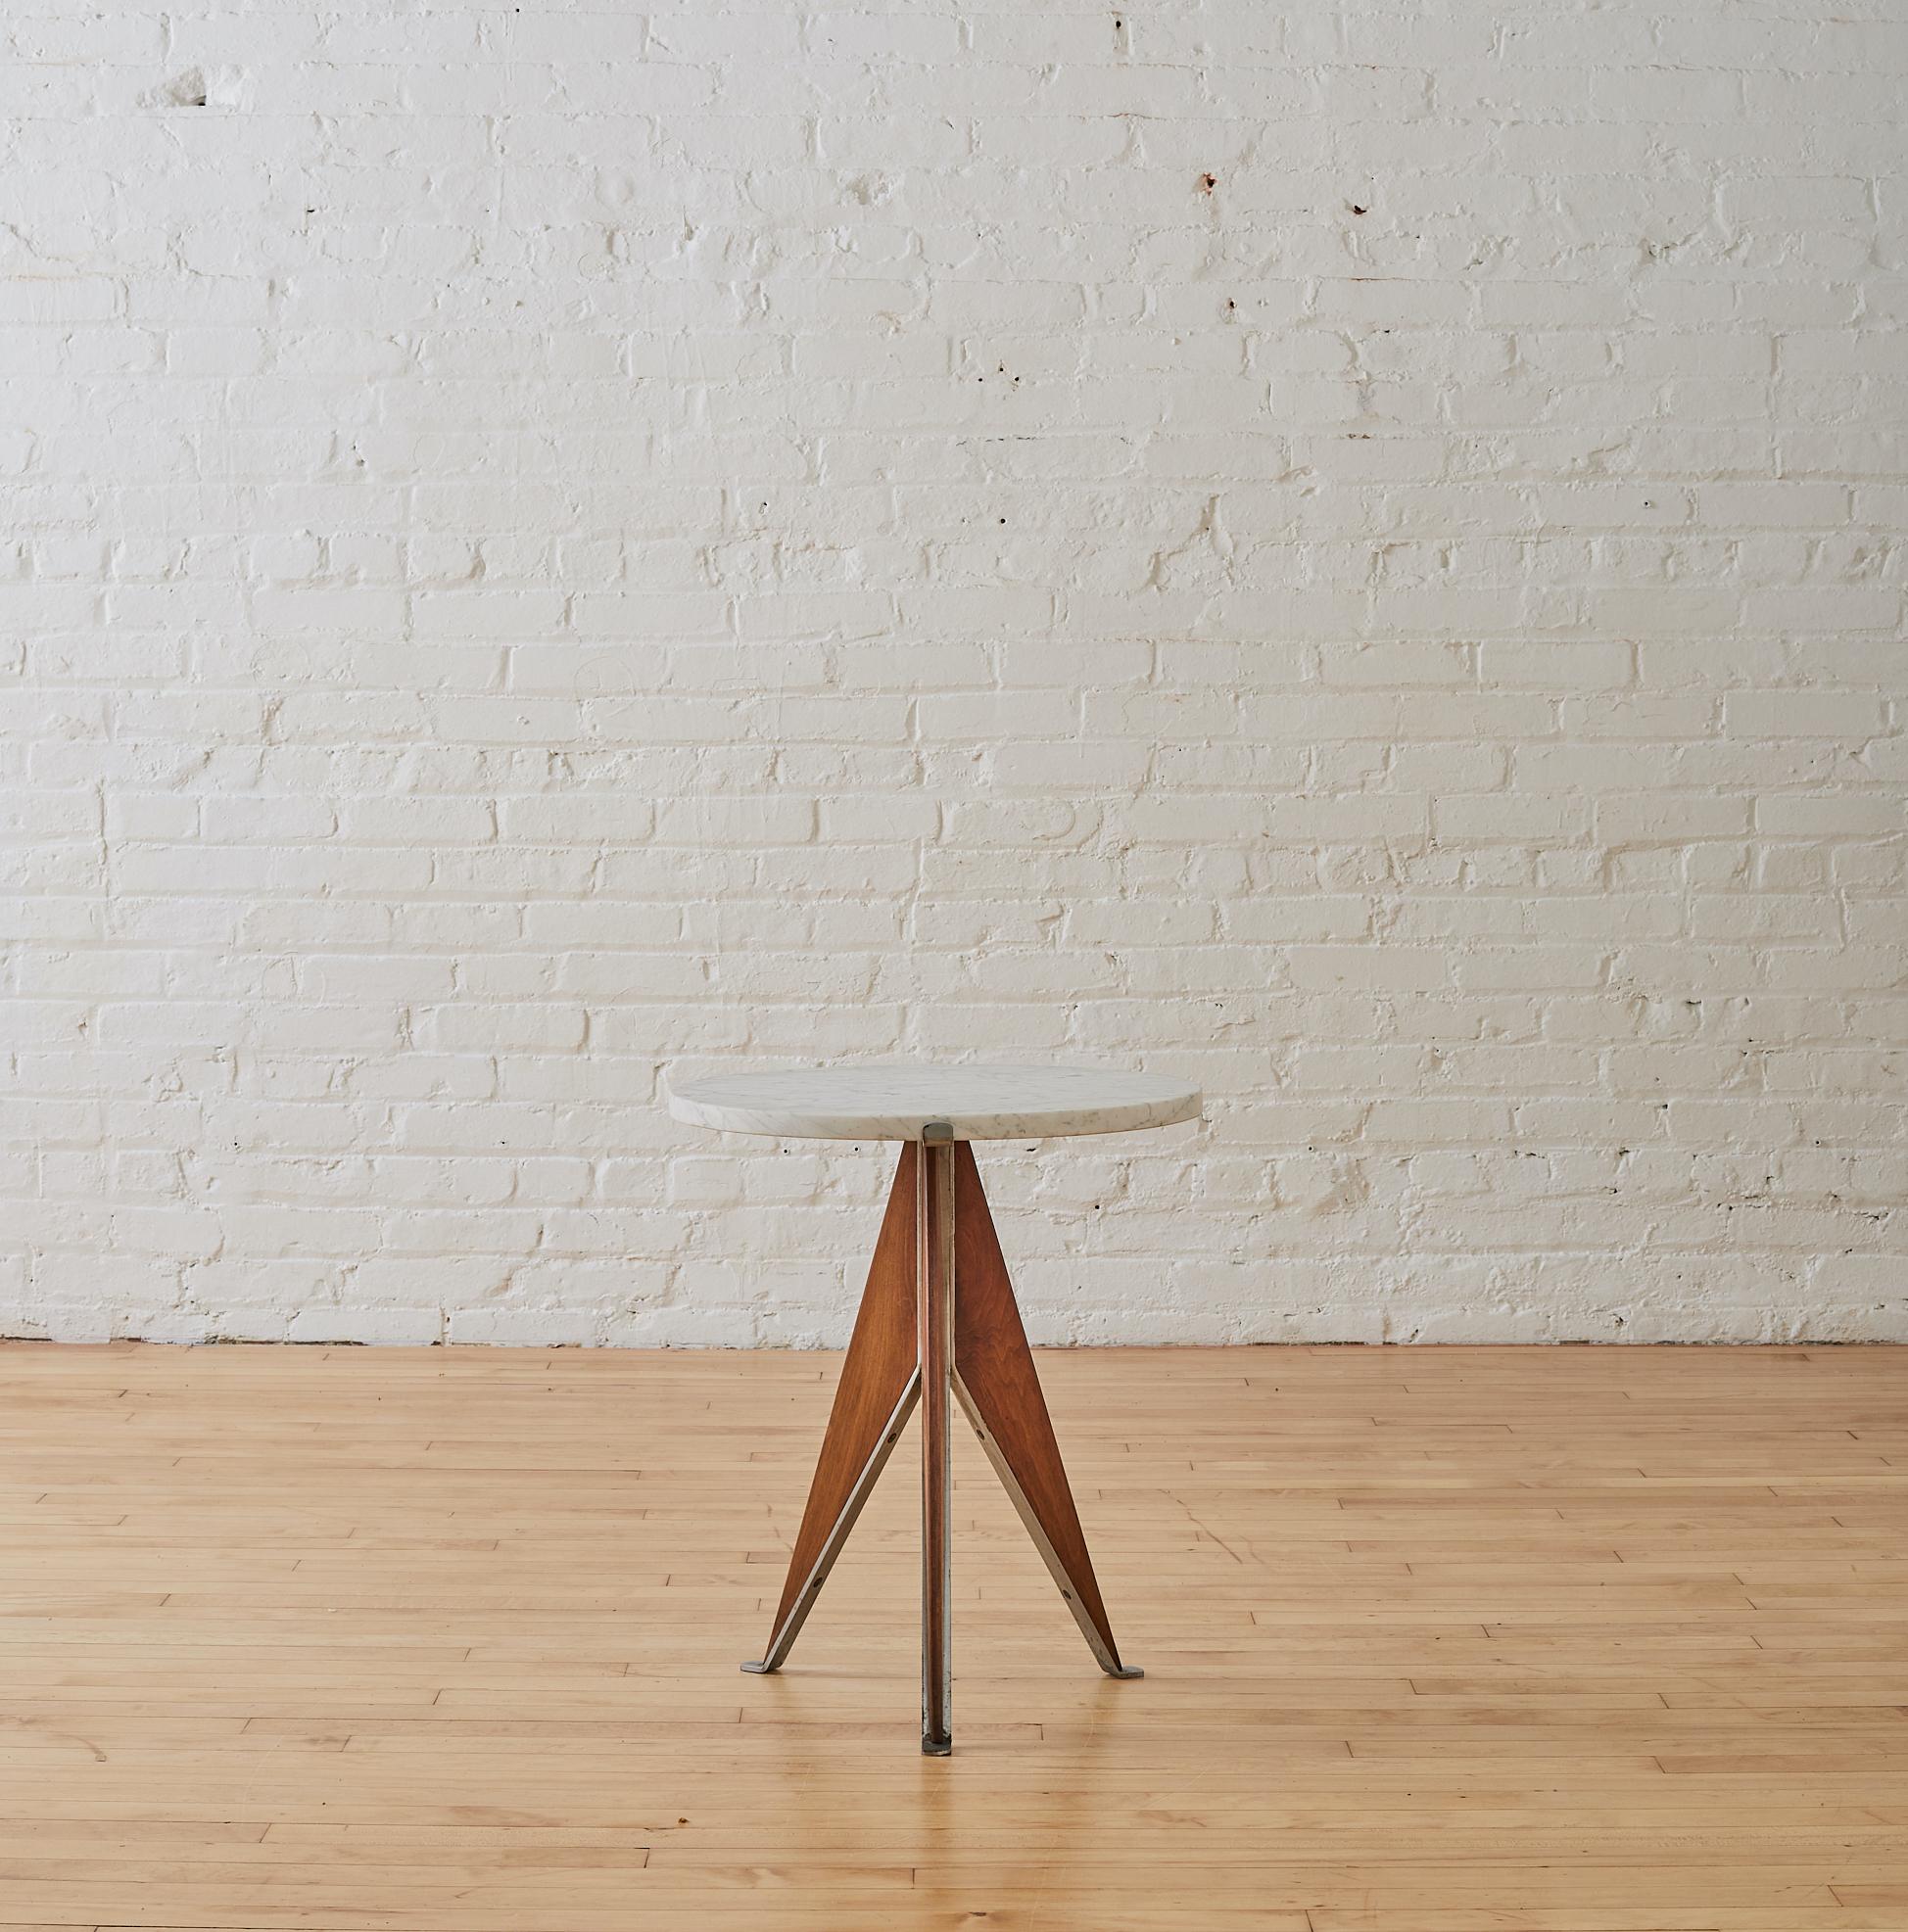 Italian Occasional Marble and Walnut Side Table with tripod legs.

